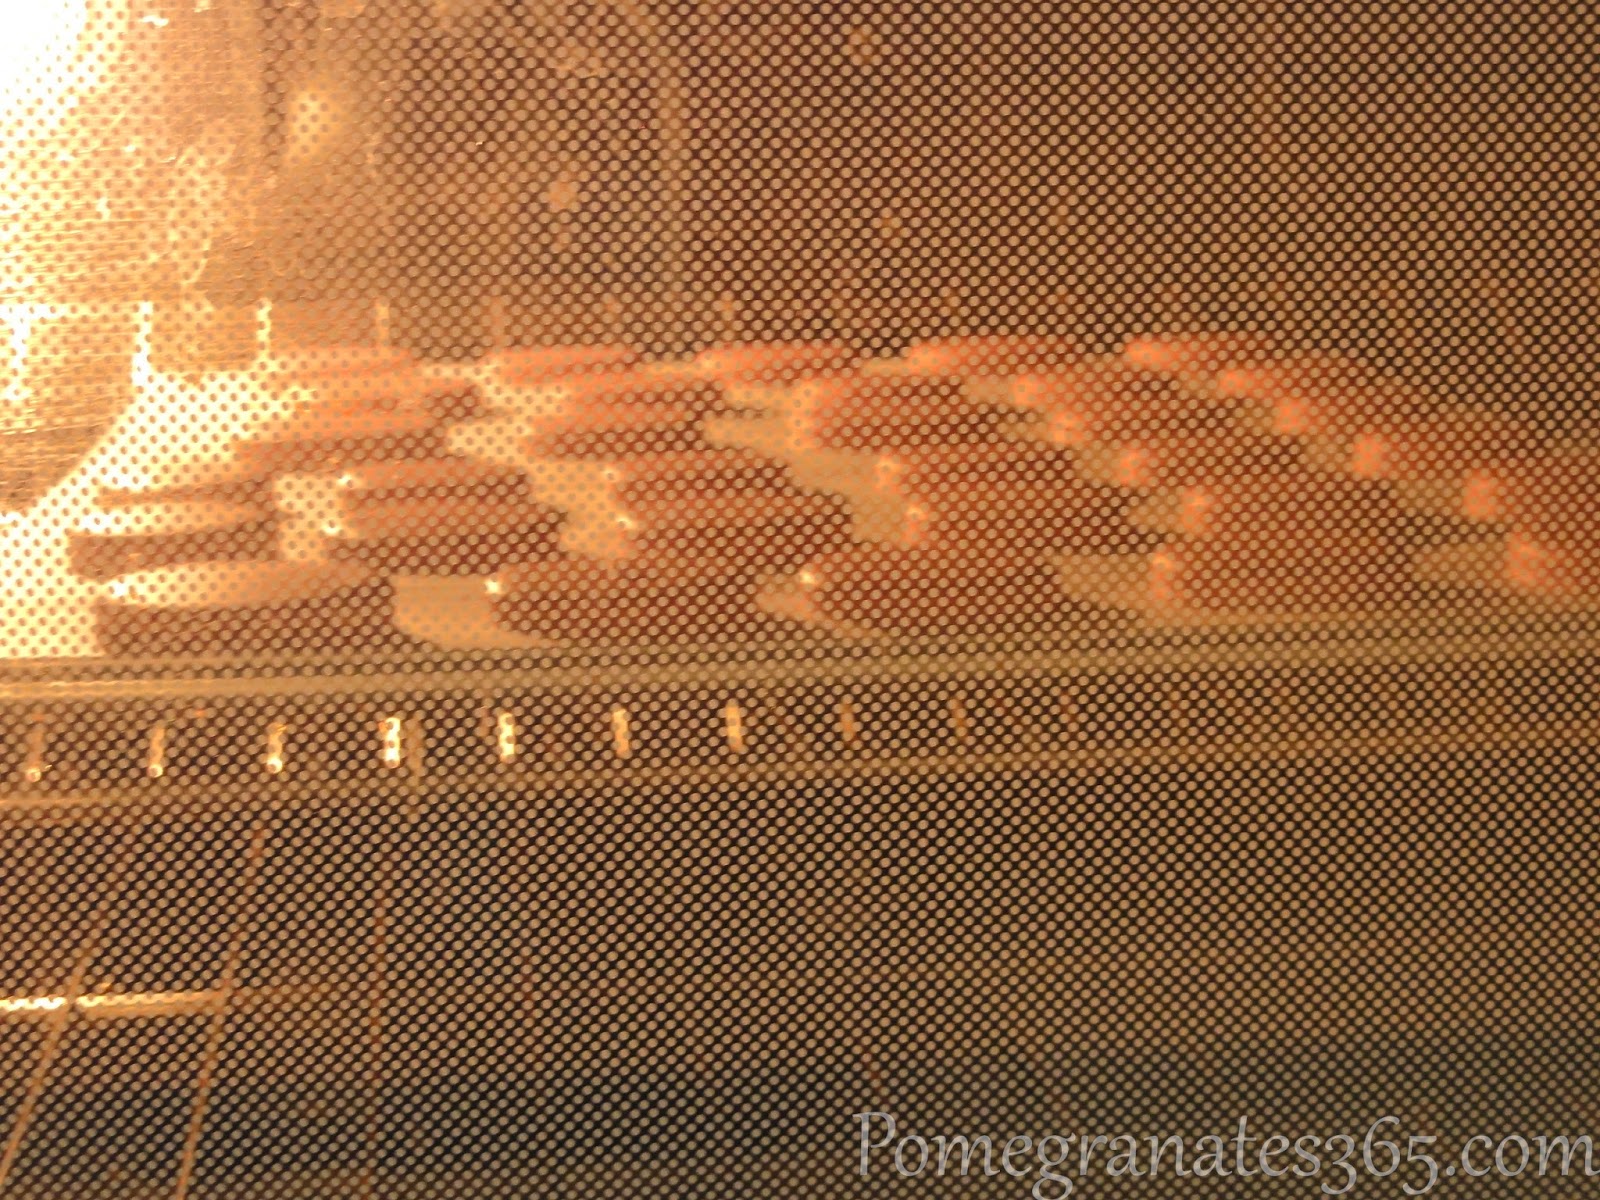 Macarons baking in the oven